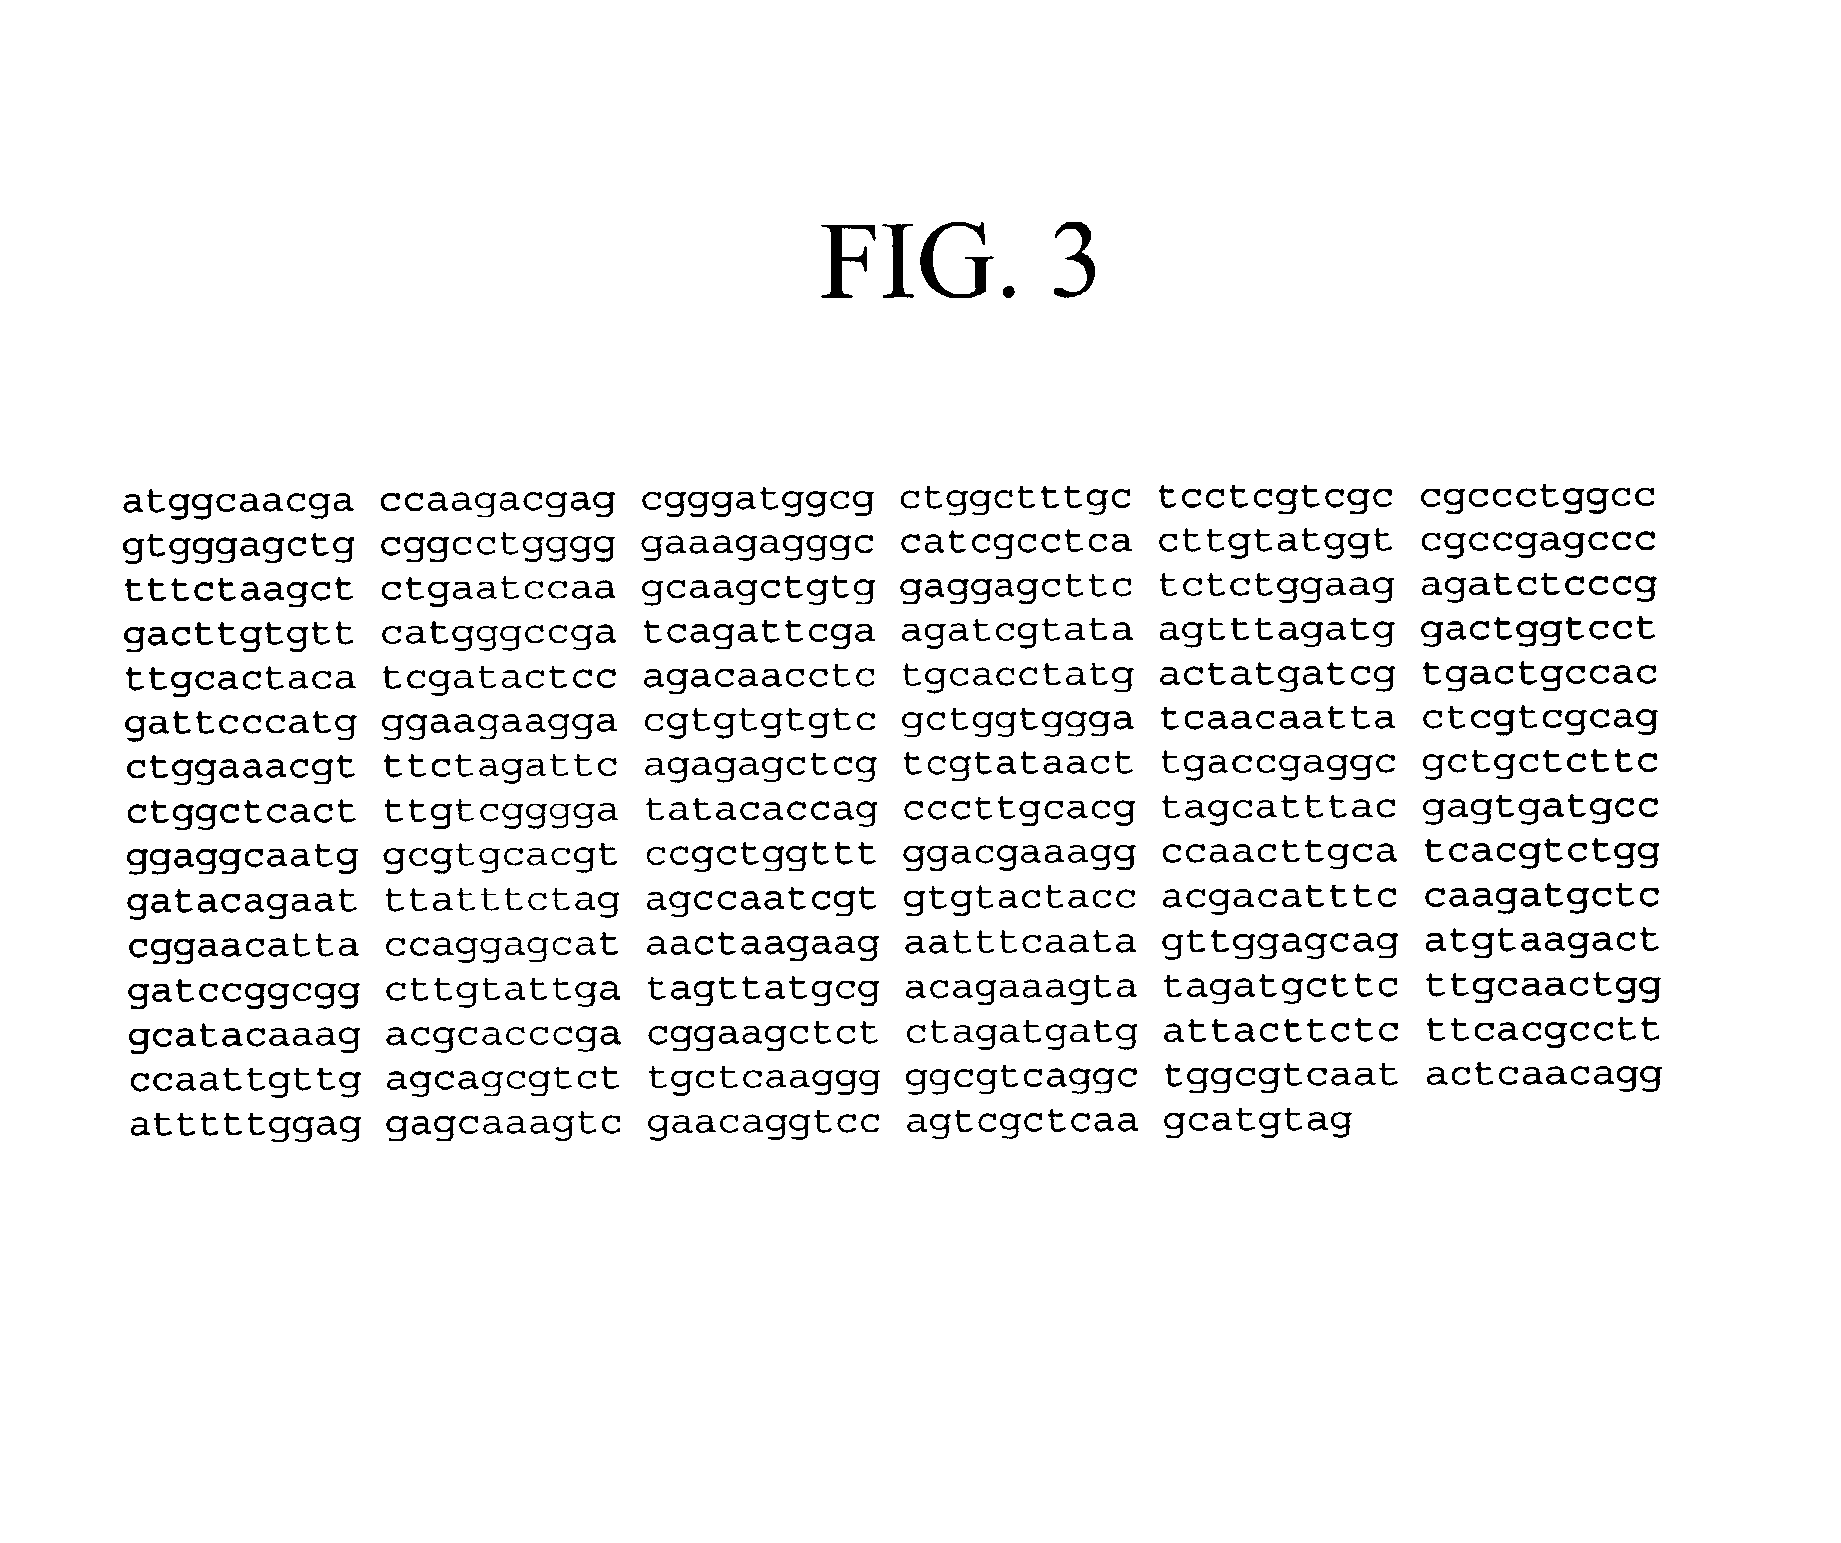 Mismatch endonucleases and methods of use